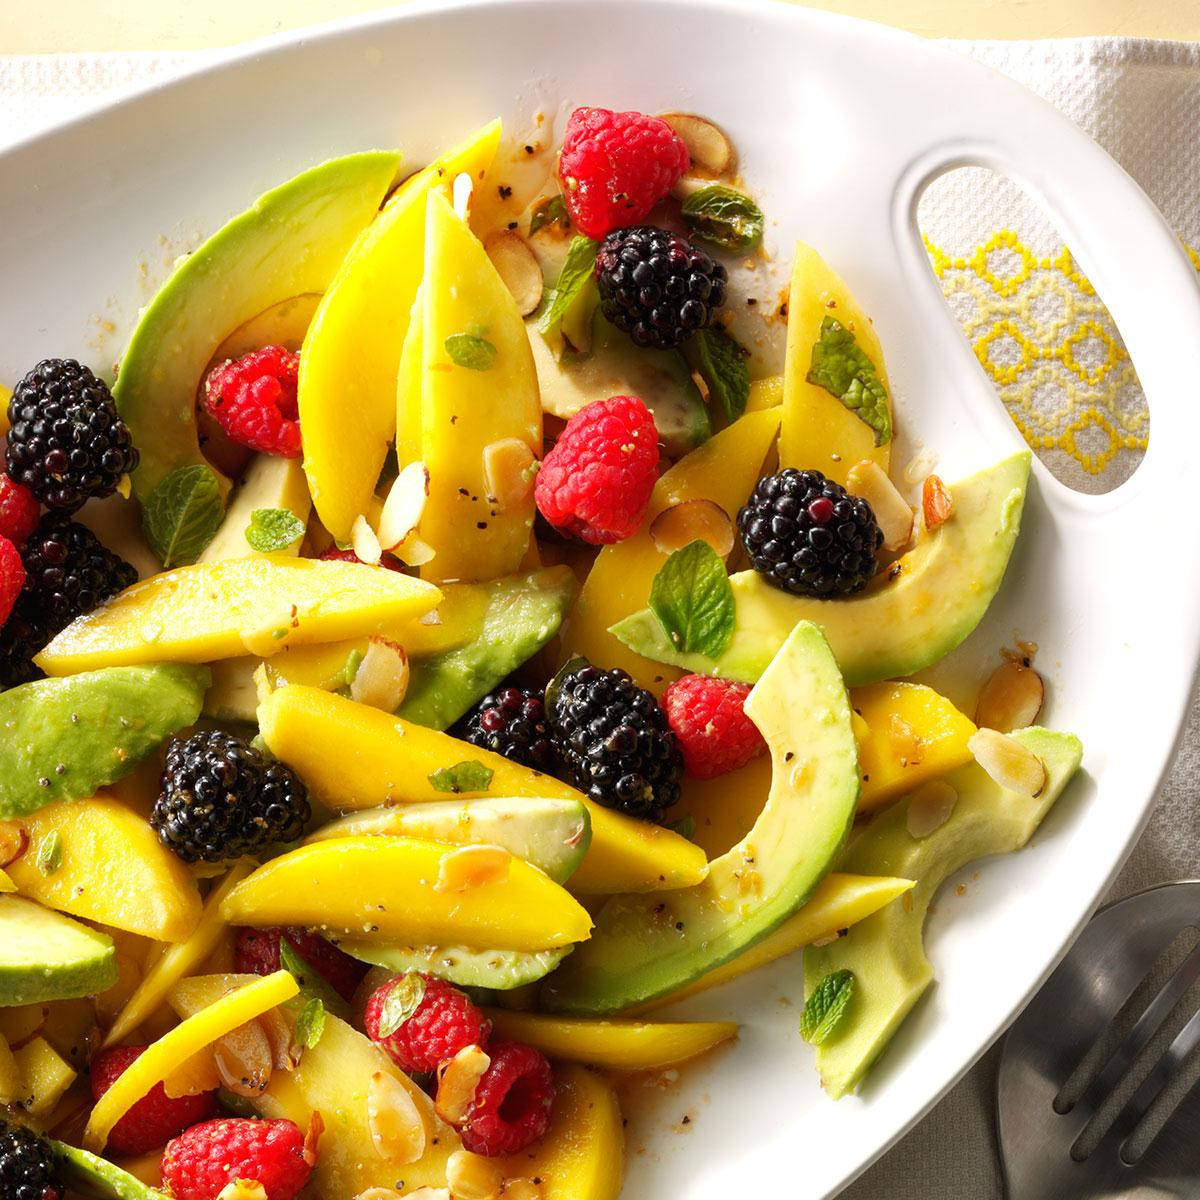 Avocado And Berries Salad Background